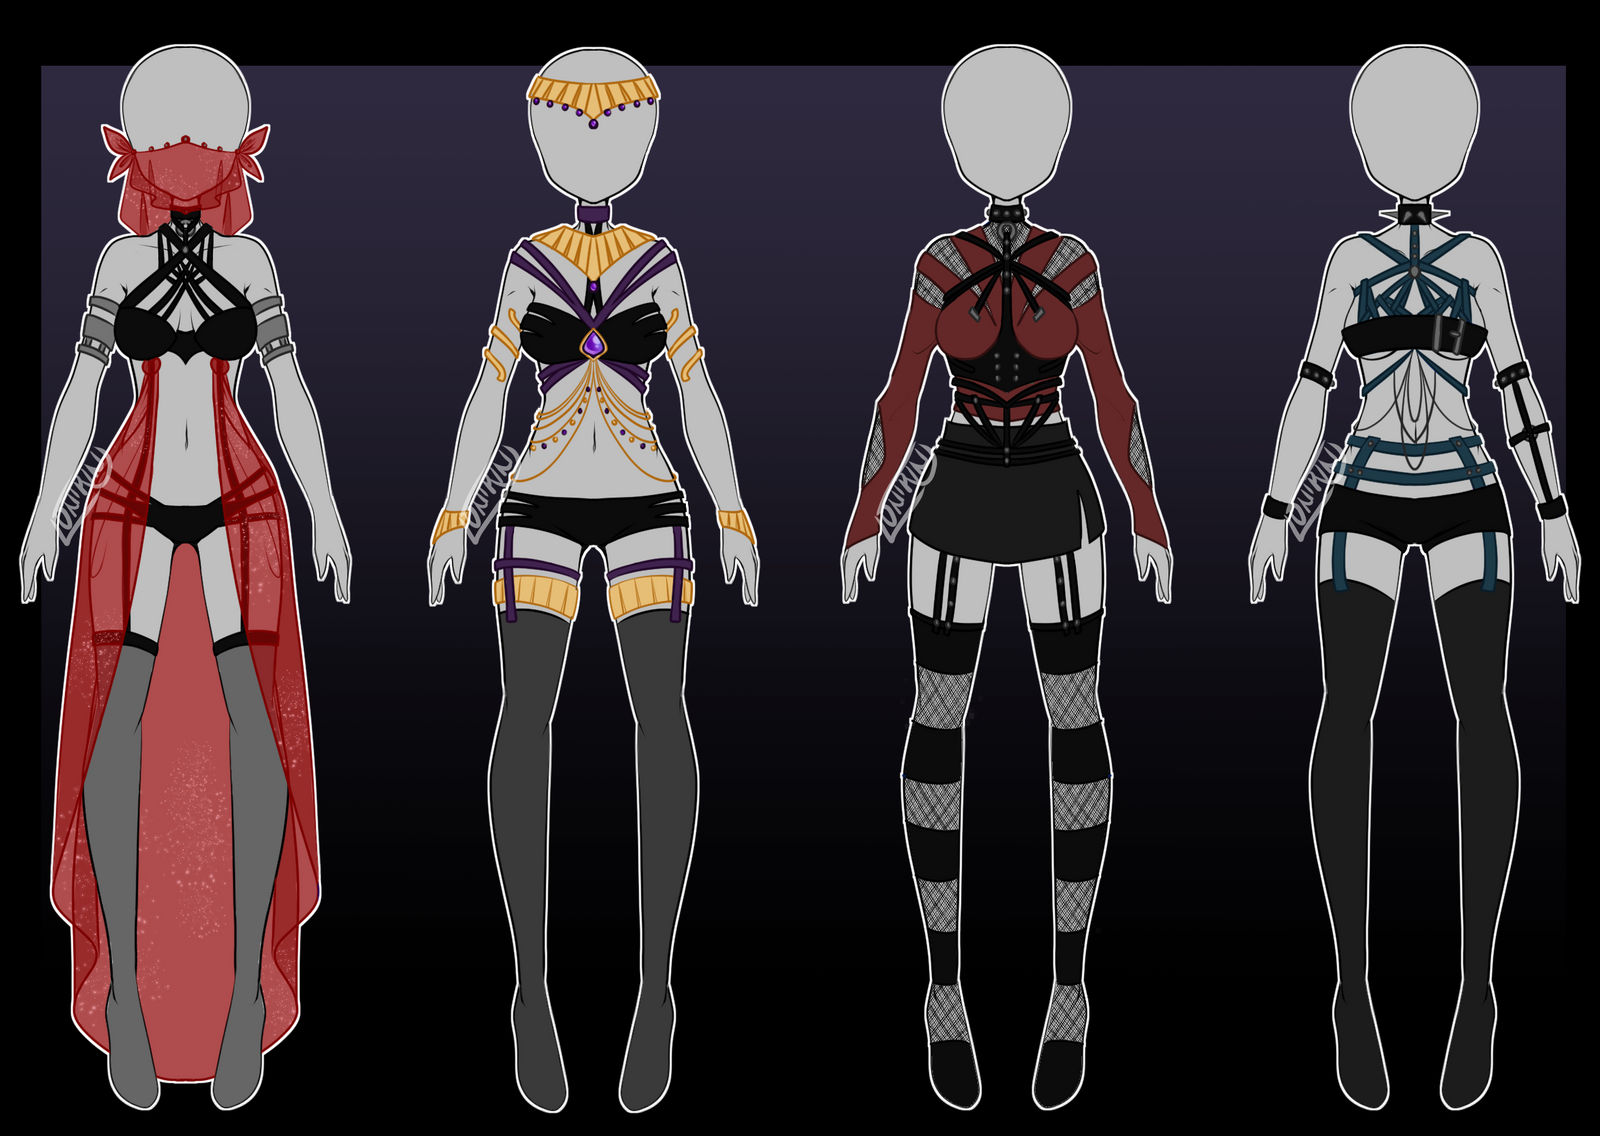 Harness Outfit Adopts [closed] by Onirini on DeviantArt